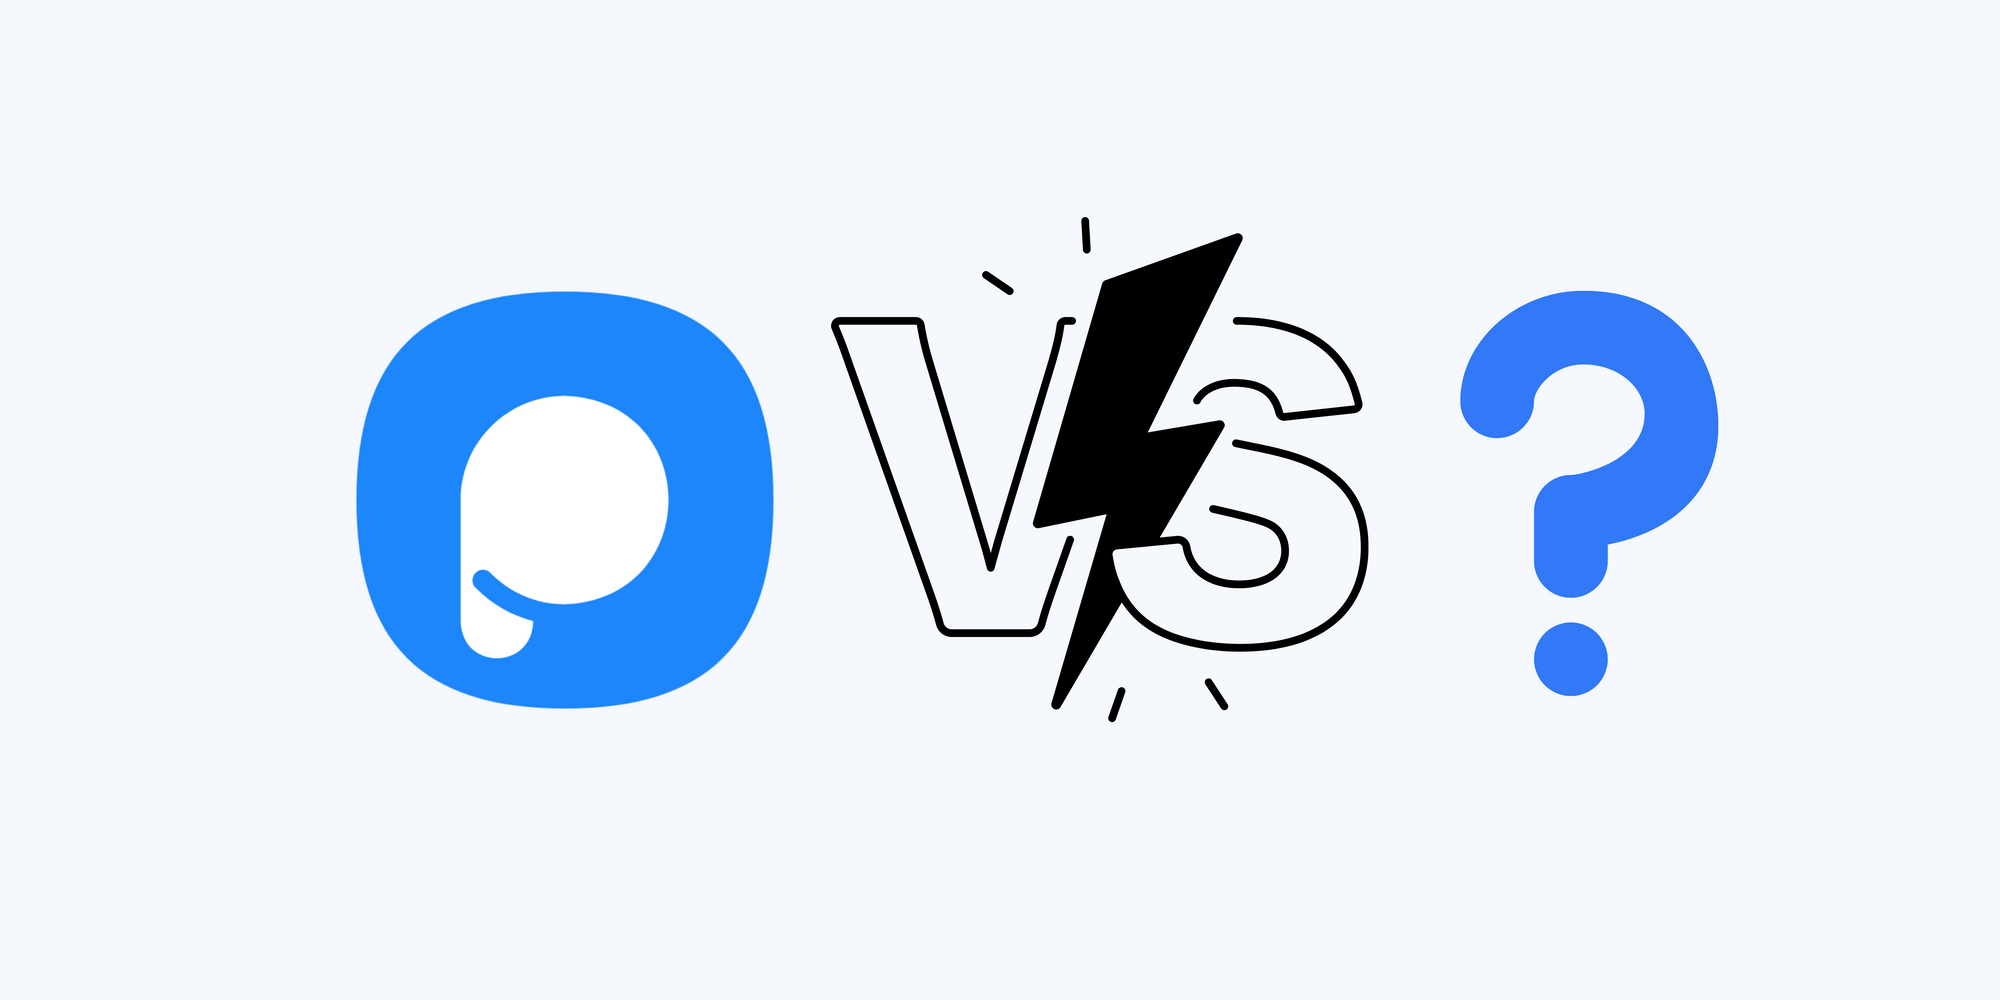 Popupsmart icon, versus symbol and a question mark to mention the alternatives on blue background